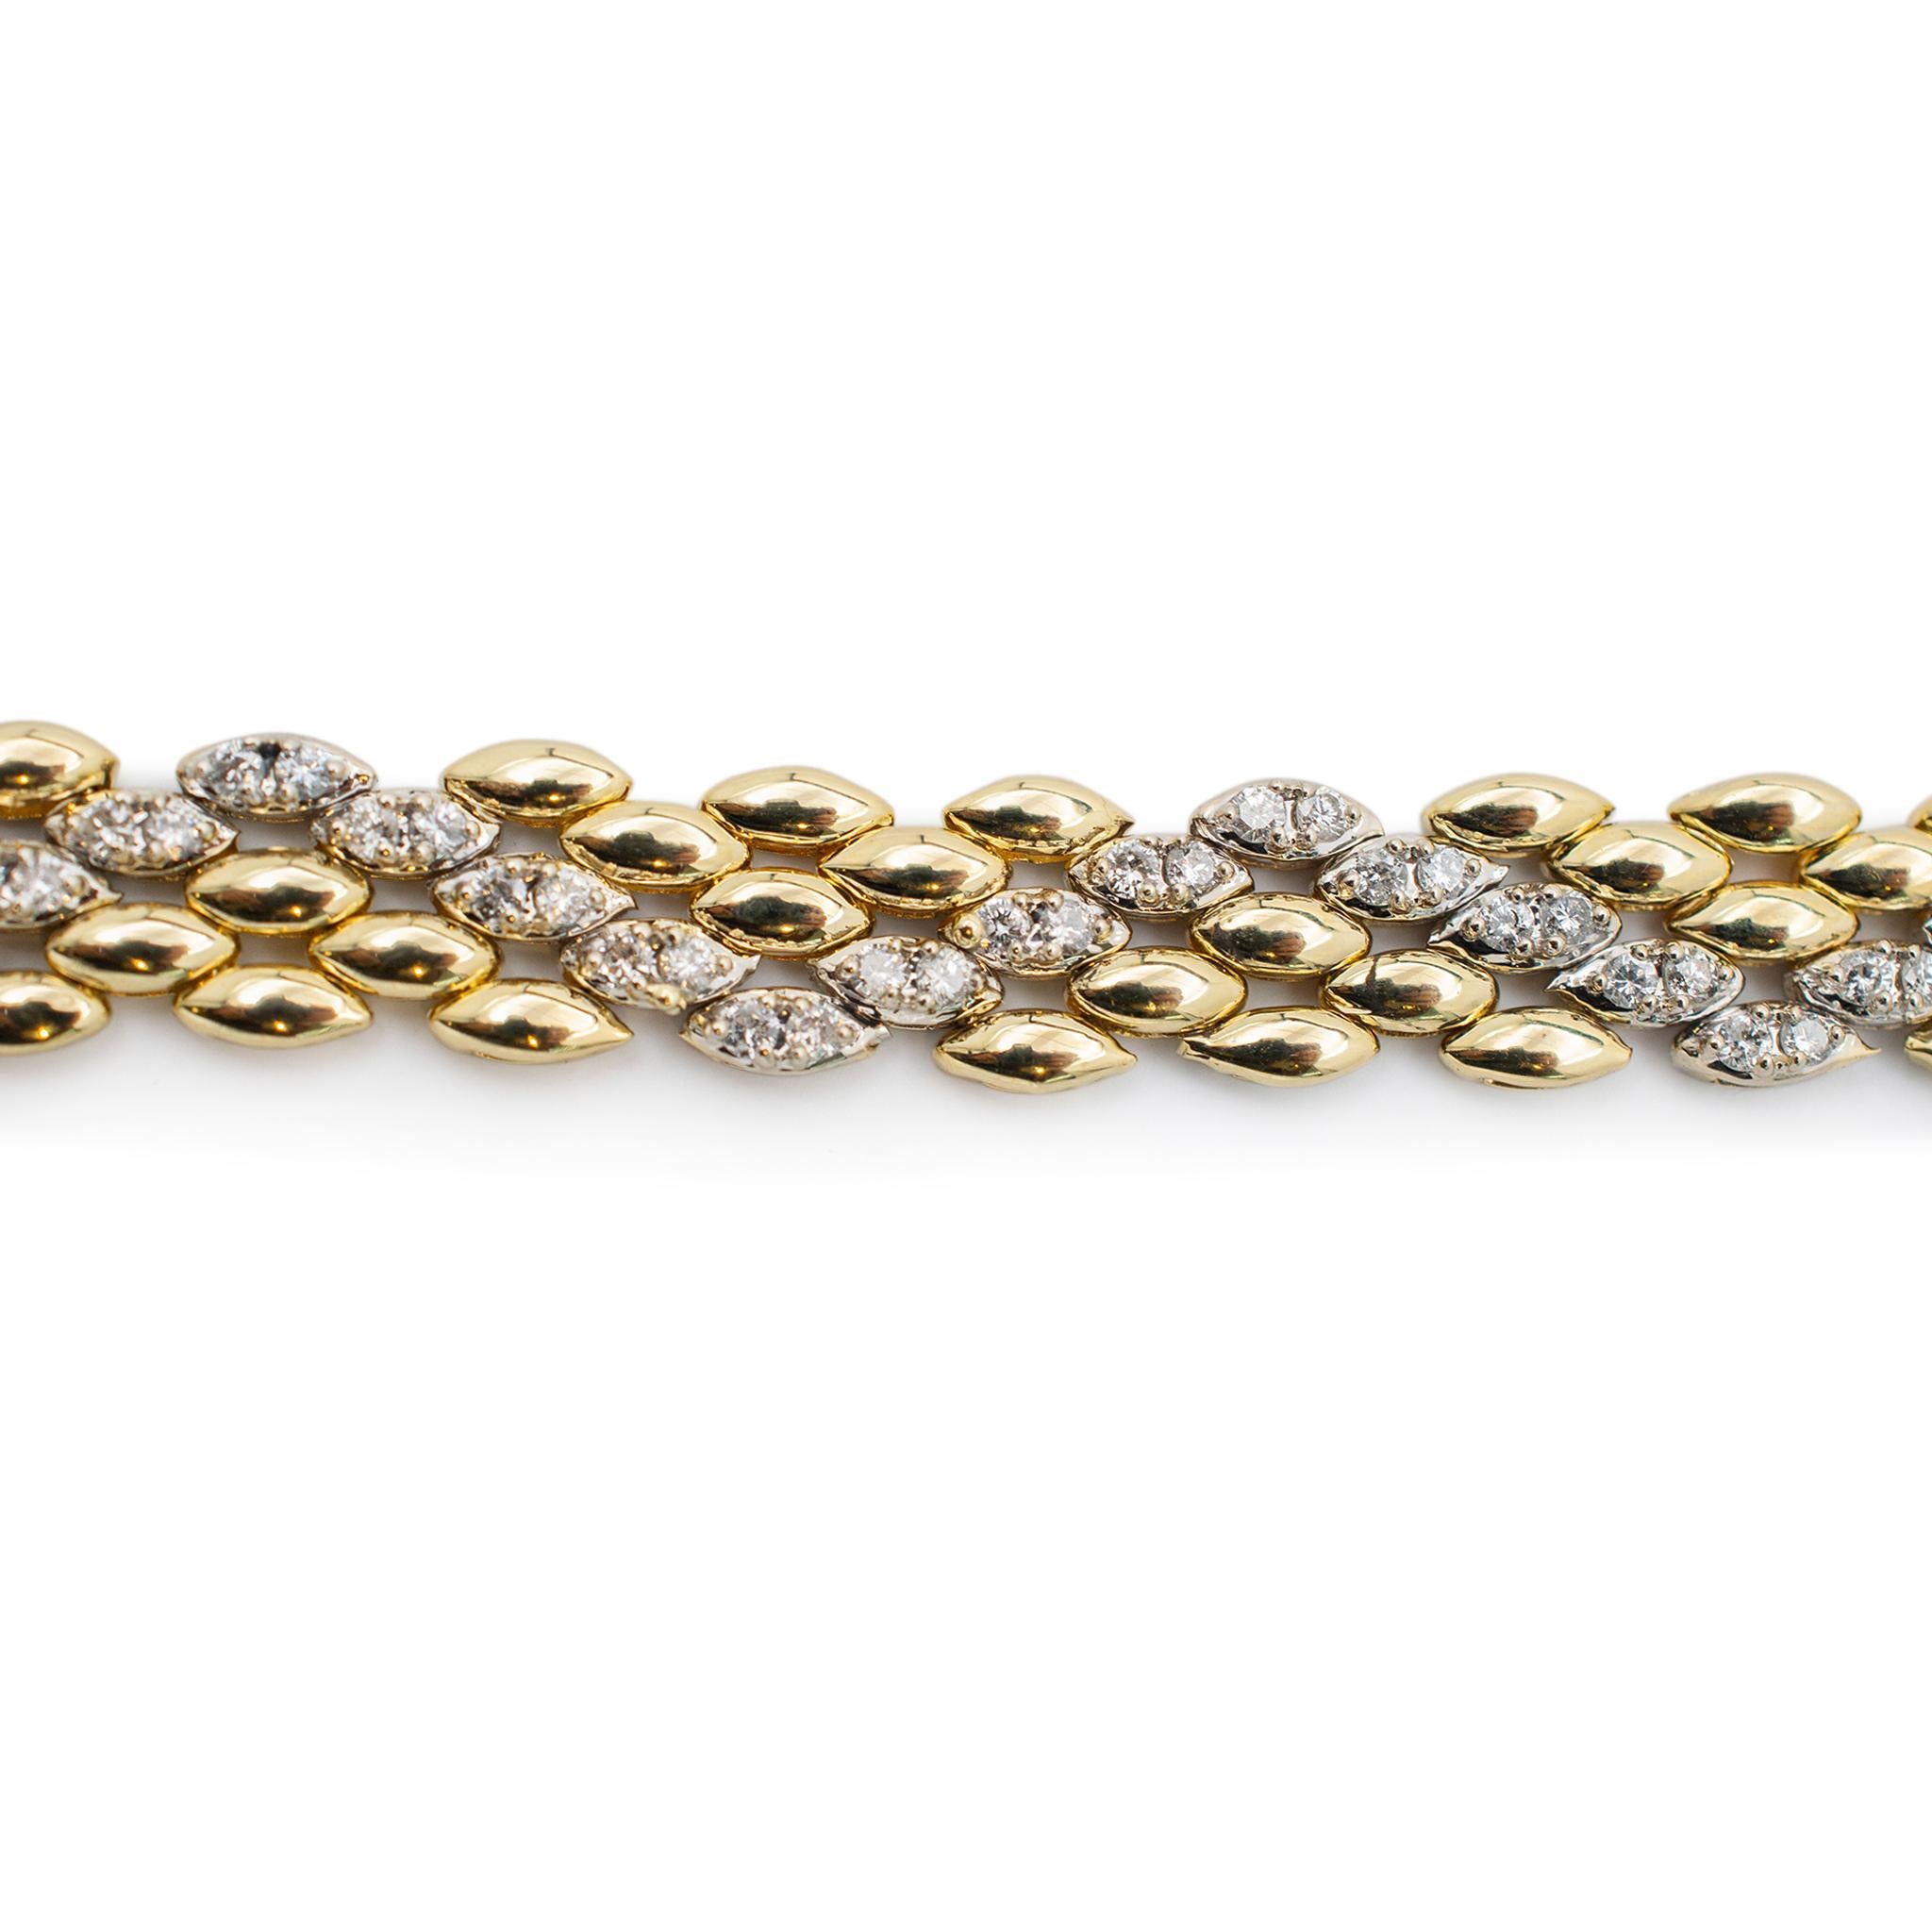 Unisex 14K Yellow & White Gold Diamond Link Bracelet In Excellent Condition For Sale In Houston, TX